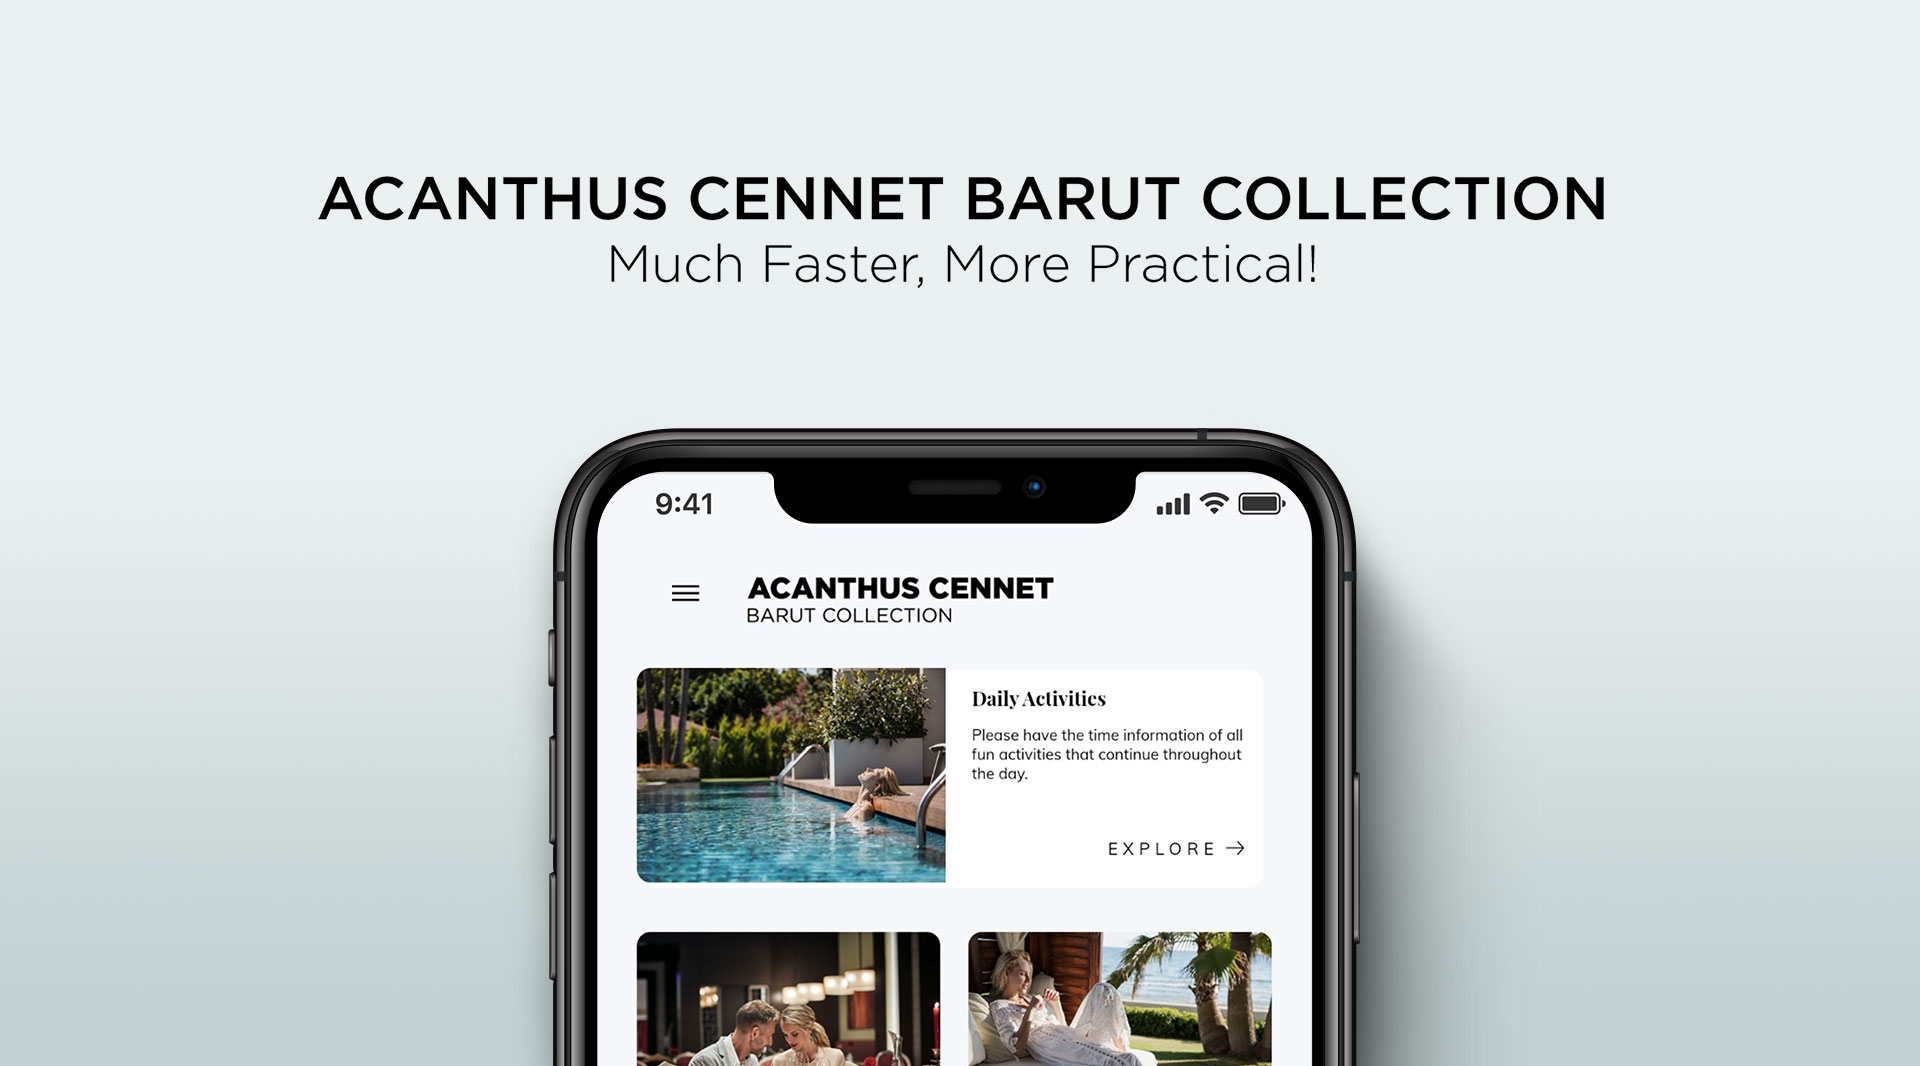 Acanthus Cennet Barut Collection Mobile Application Is Waiting For You At Google Play Store Or App Store.